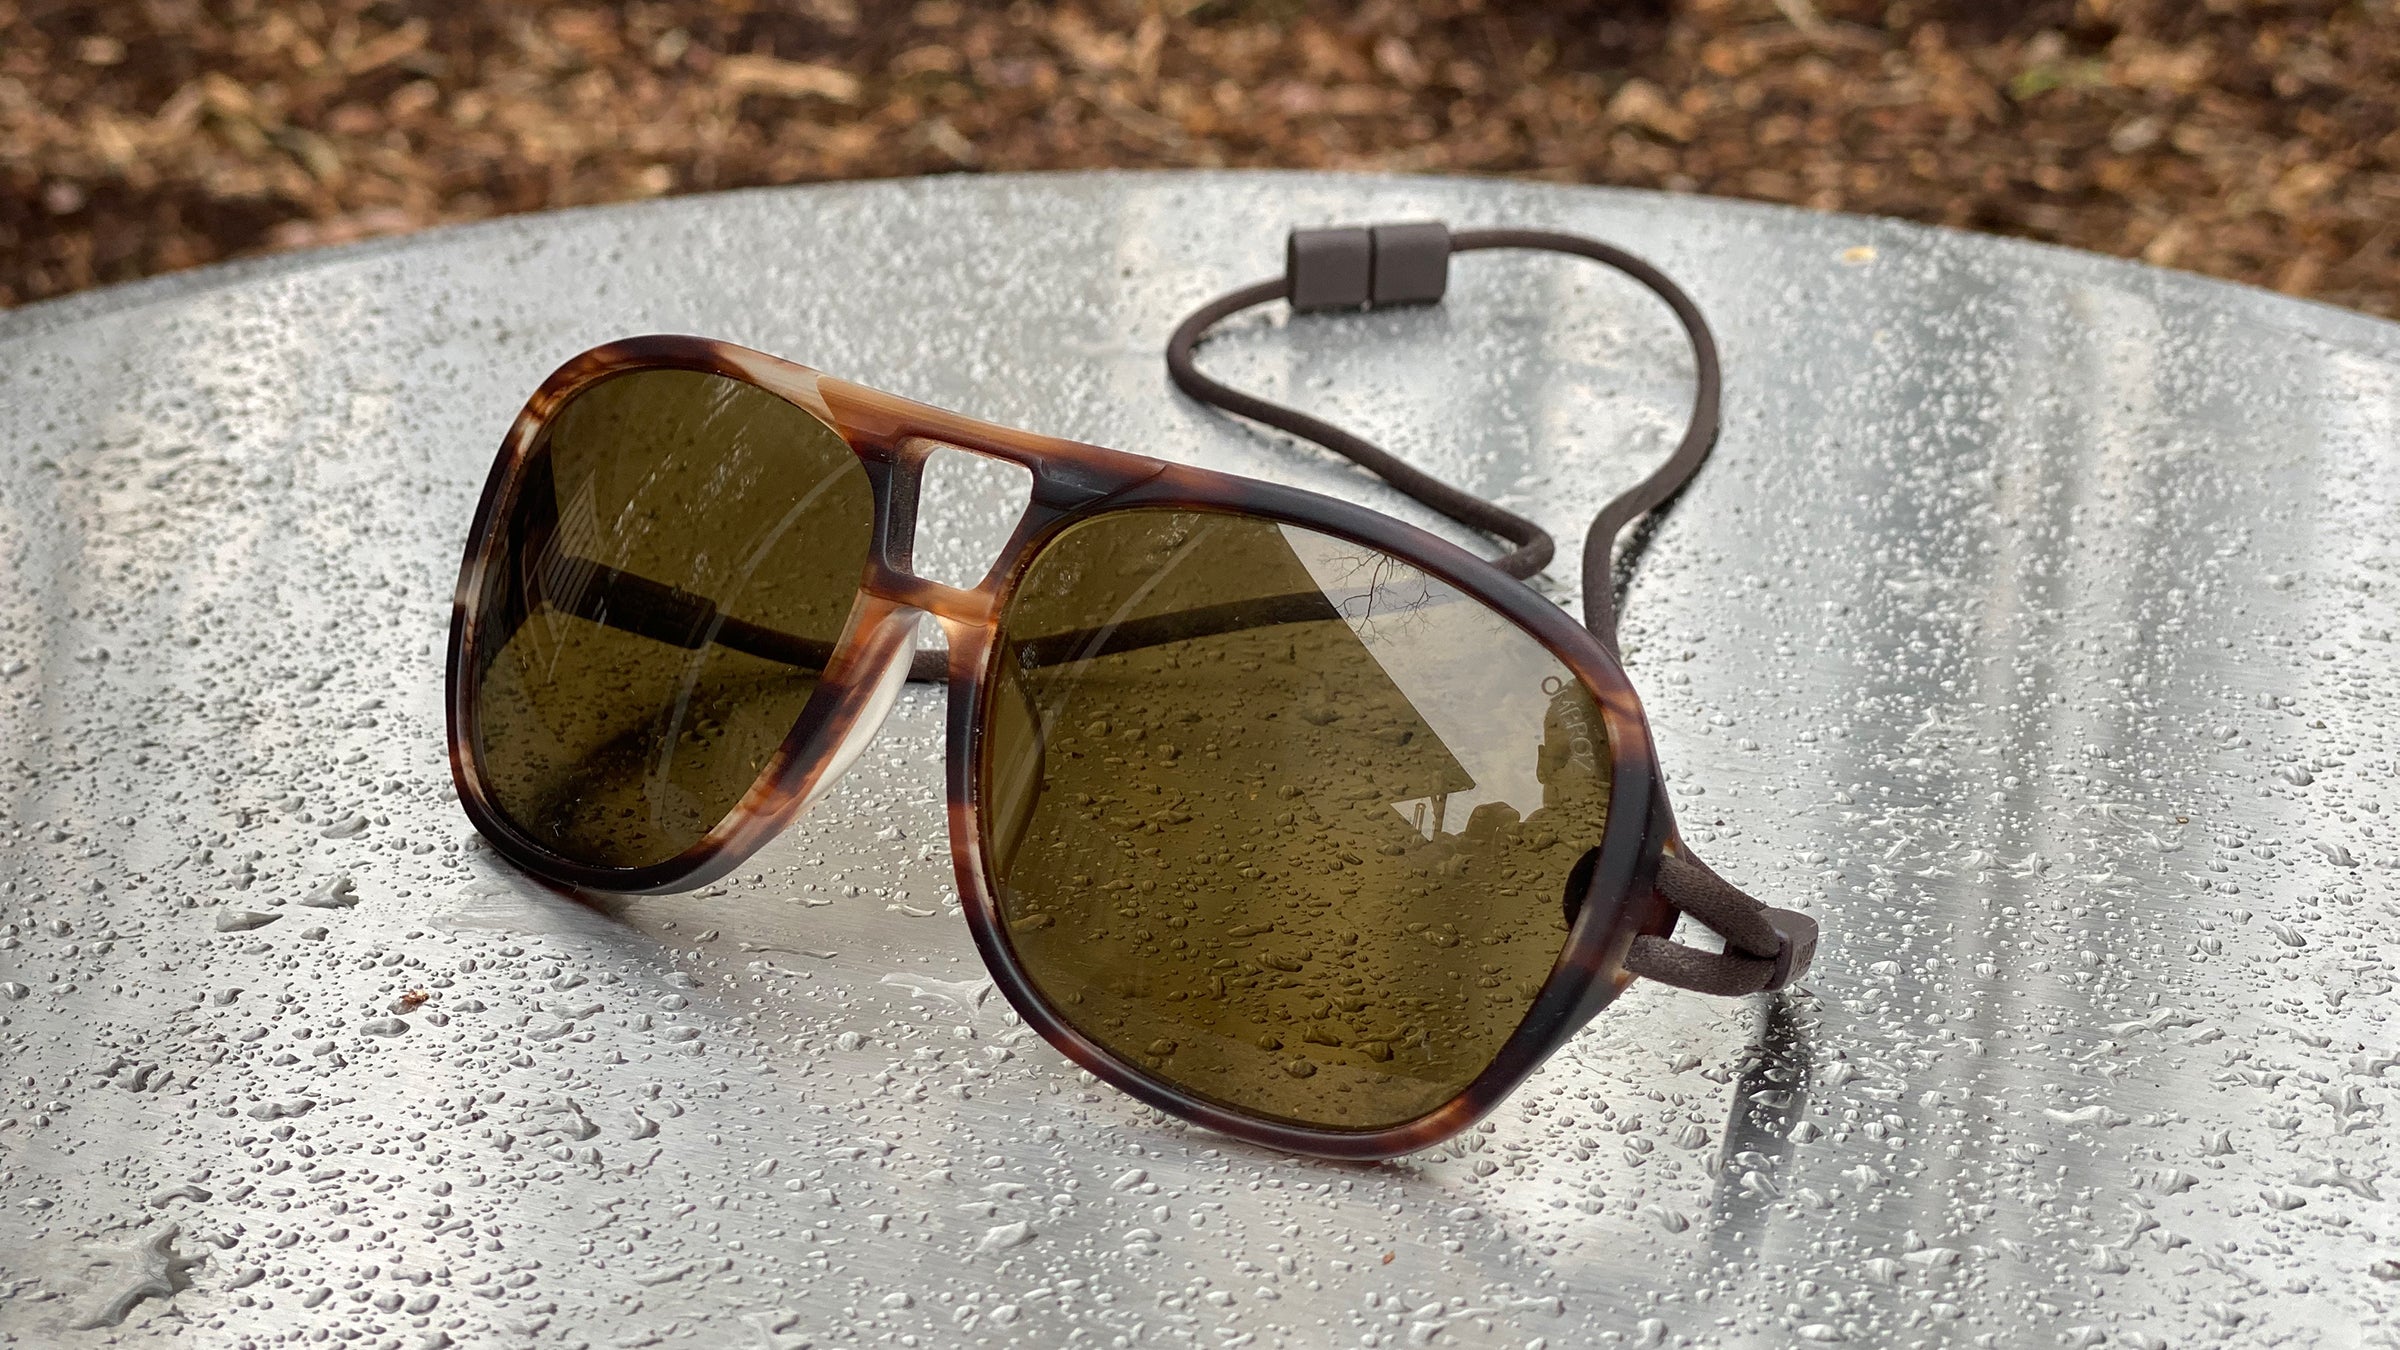 Blender Eclipse Sunglasses Review: Sport Sunglasses for a Great Price